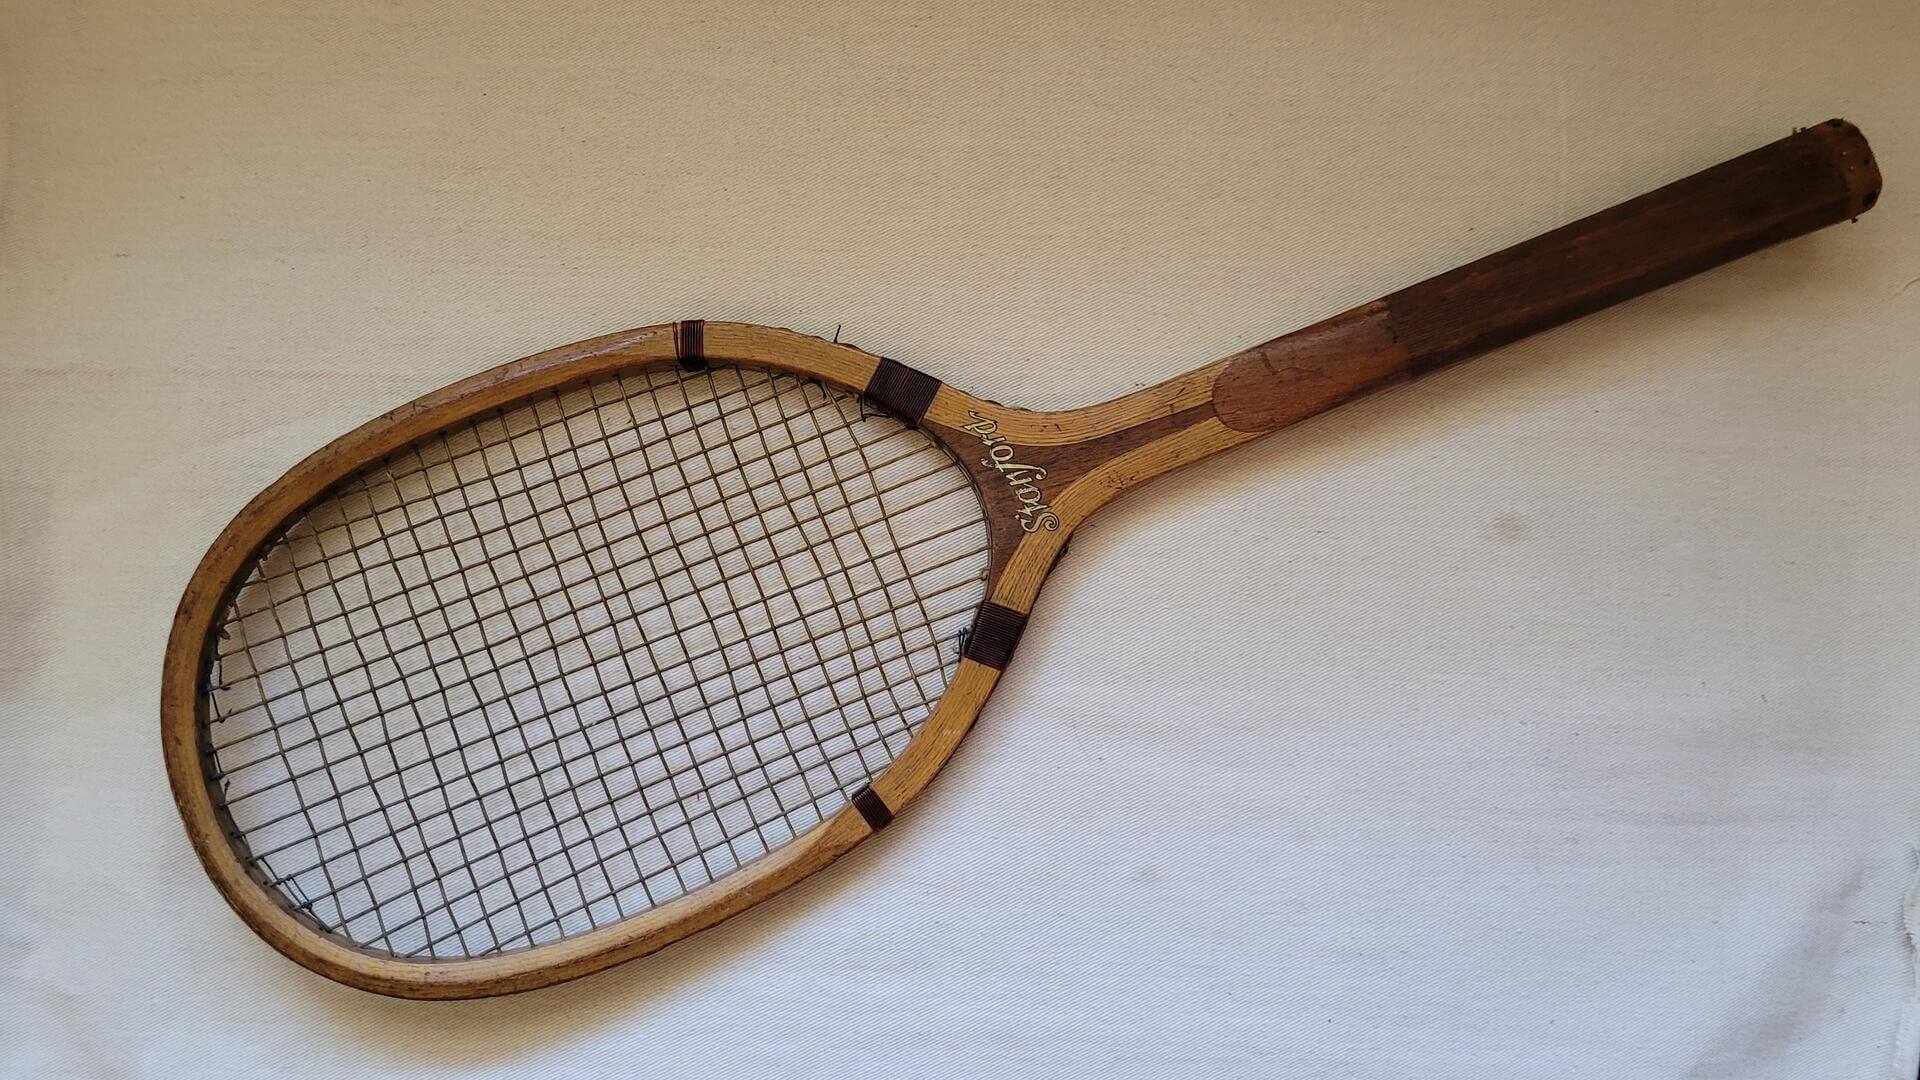 Rare Narrangansett Machine Co Antique Wooden Tennis Racquet Stanford Model manufactured in Providence Rhode Island factory - Vintage made in USA racquet sports equipment and memorabilia collectible